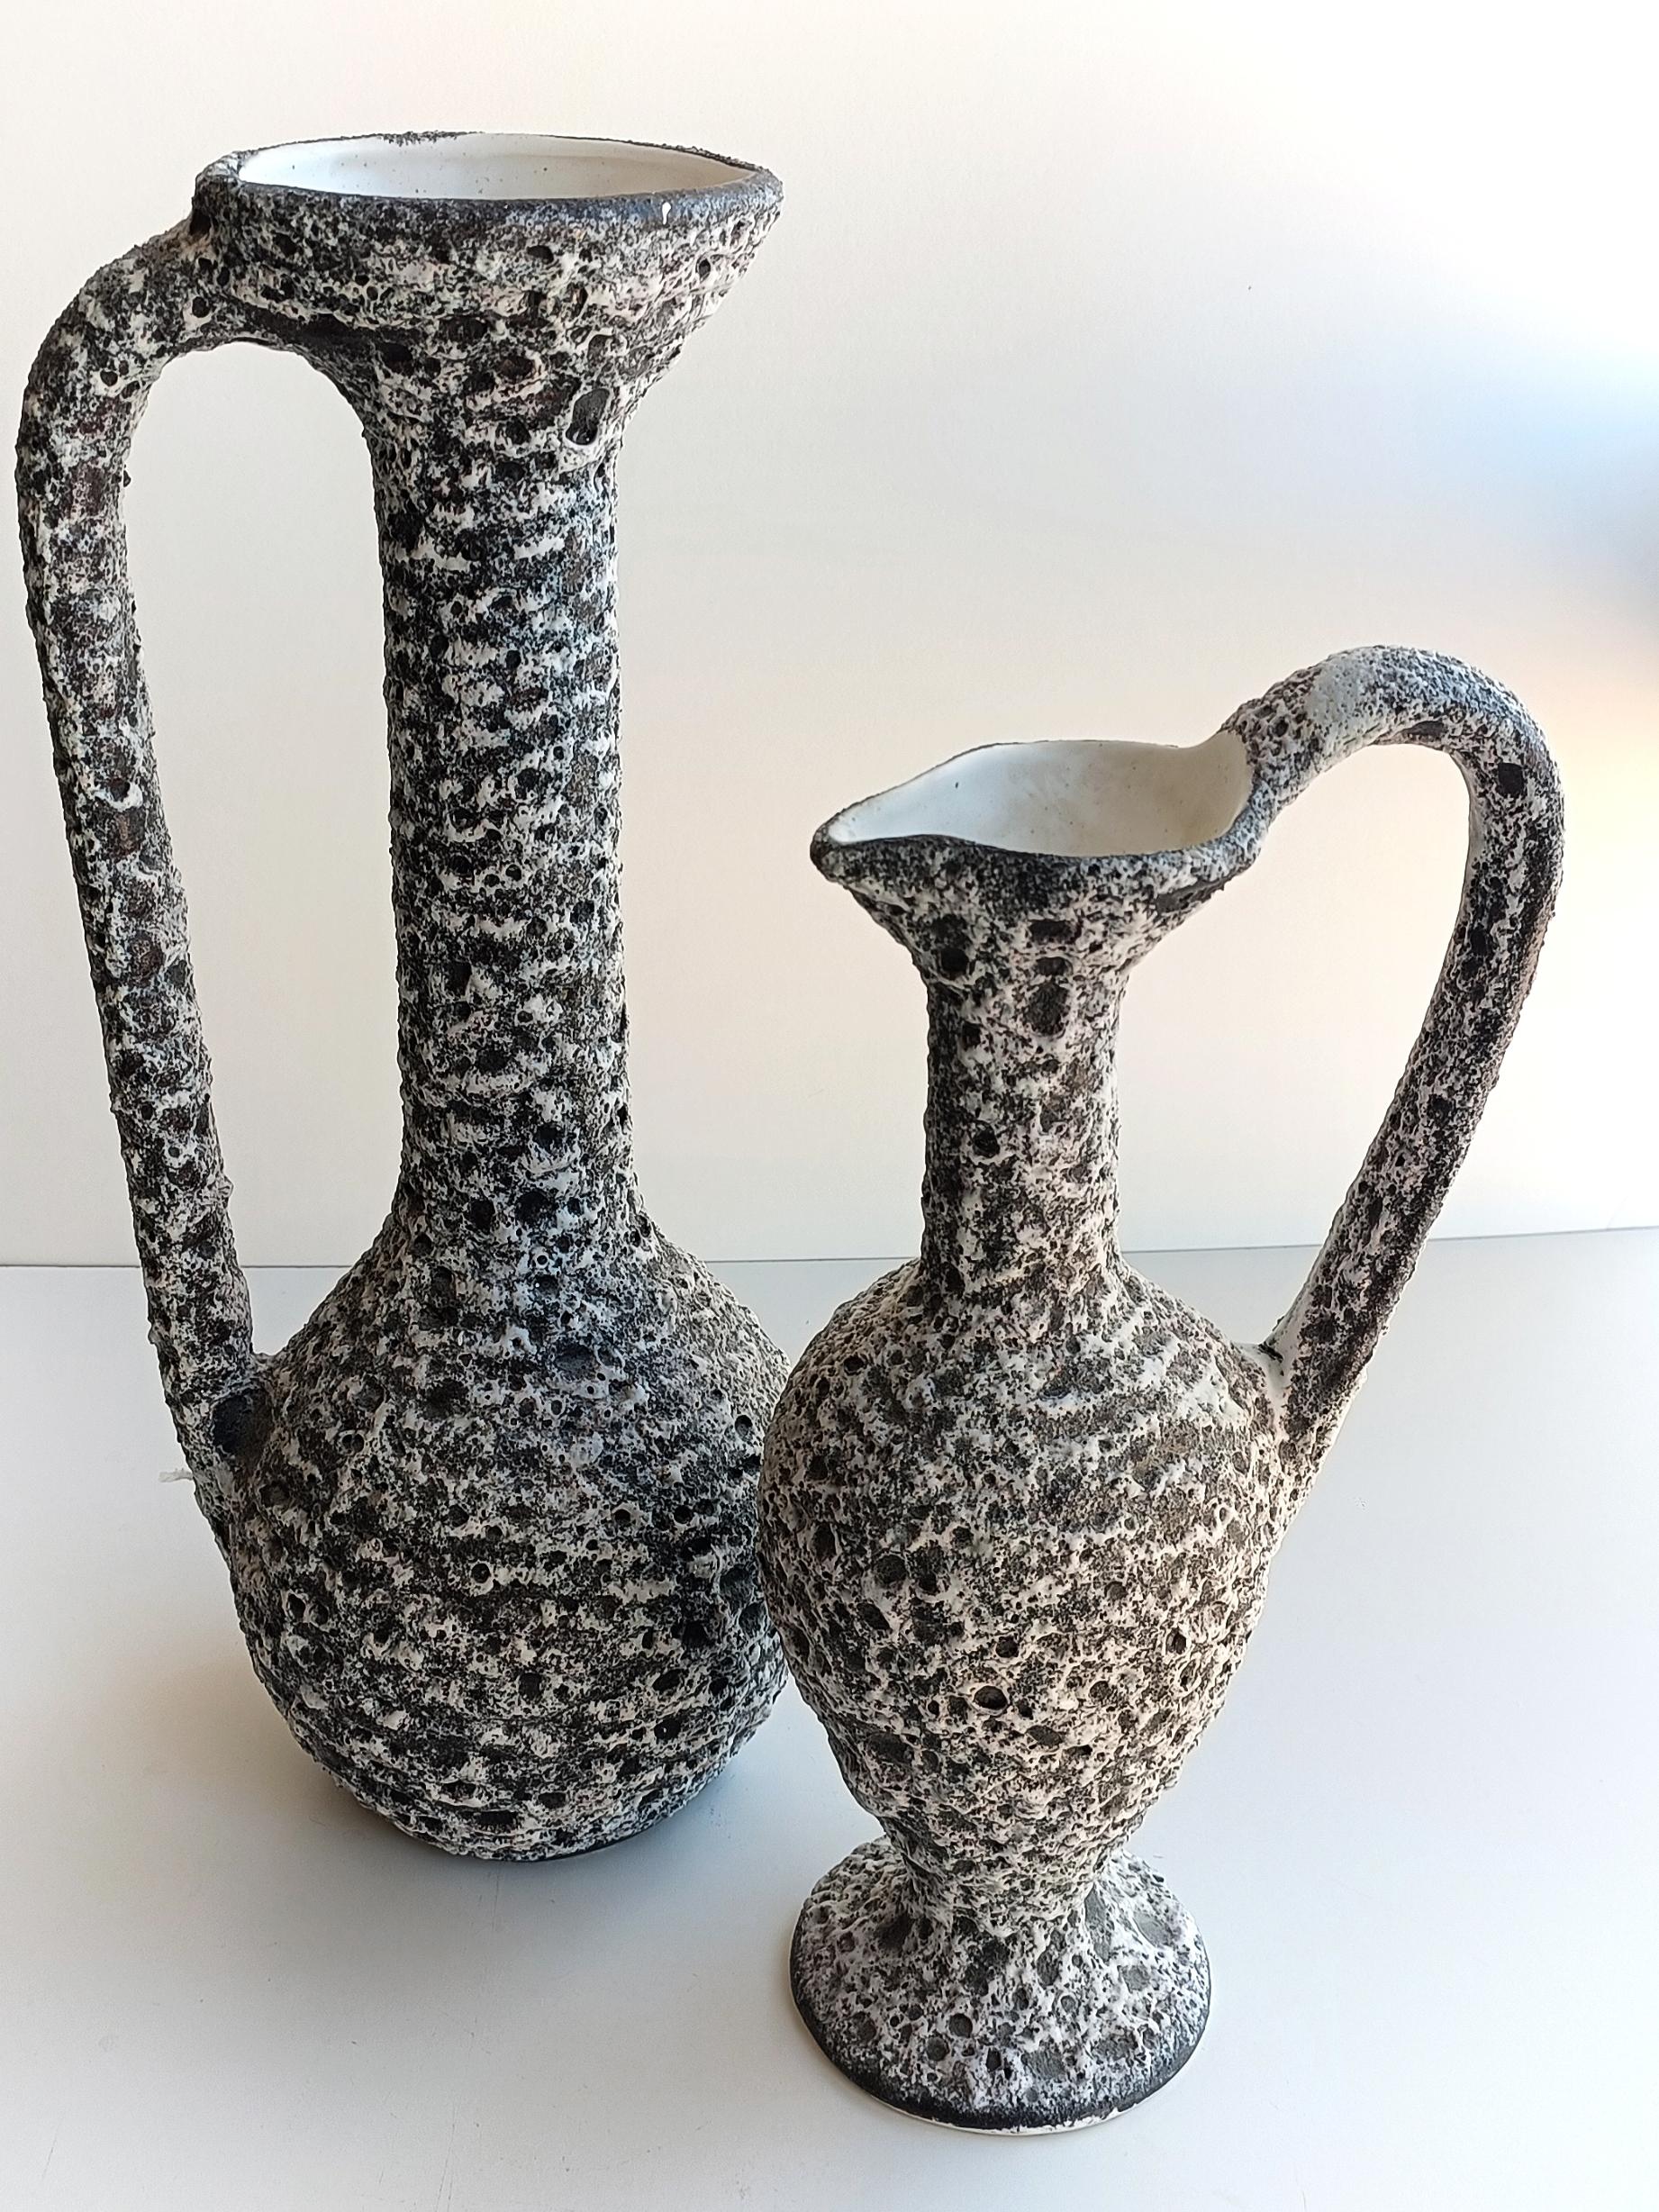 20th Century Vintage French Vallauris Set of Two Ceramic Pitchers Signed Alain Rufas, 1960s For Sale